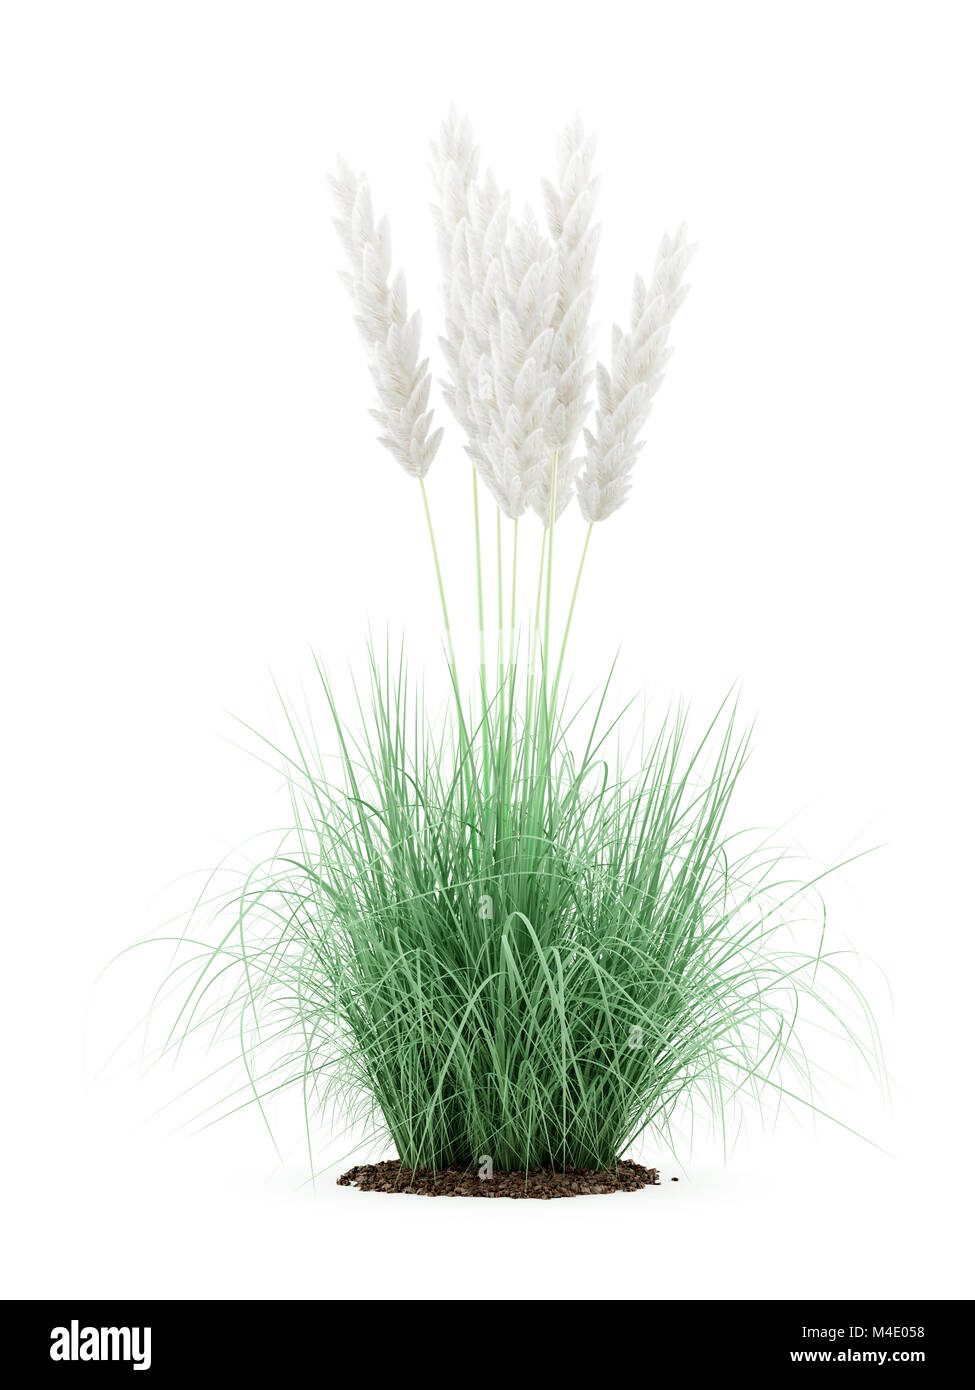 ornamental grass plant isolated on white background Stock Photo